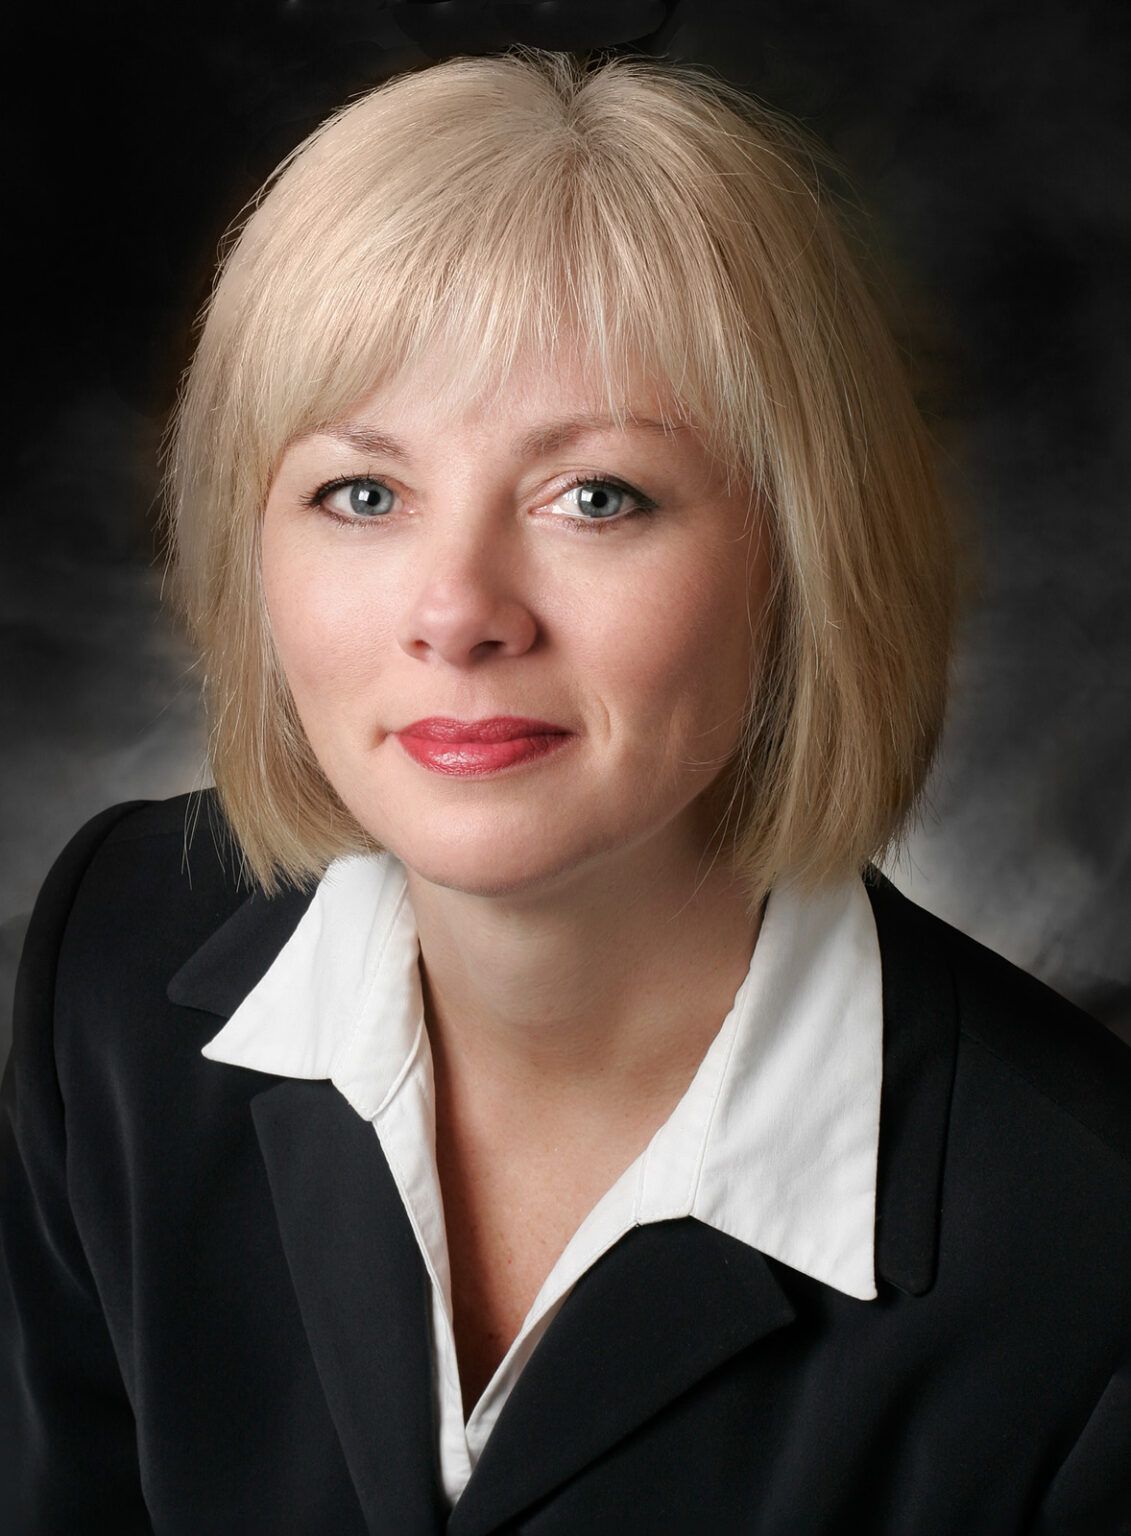 a woman with blonde hair and blue eyes is wearing a black jacket and white shirt